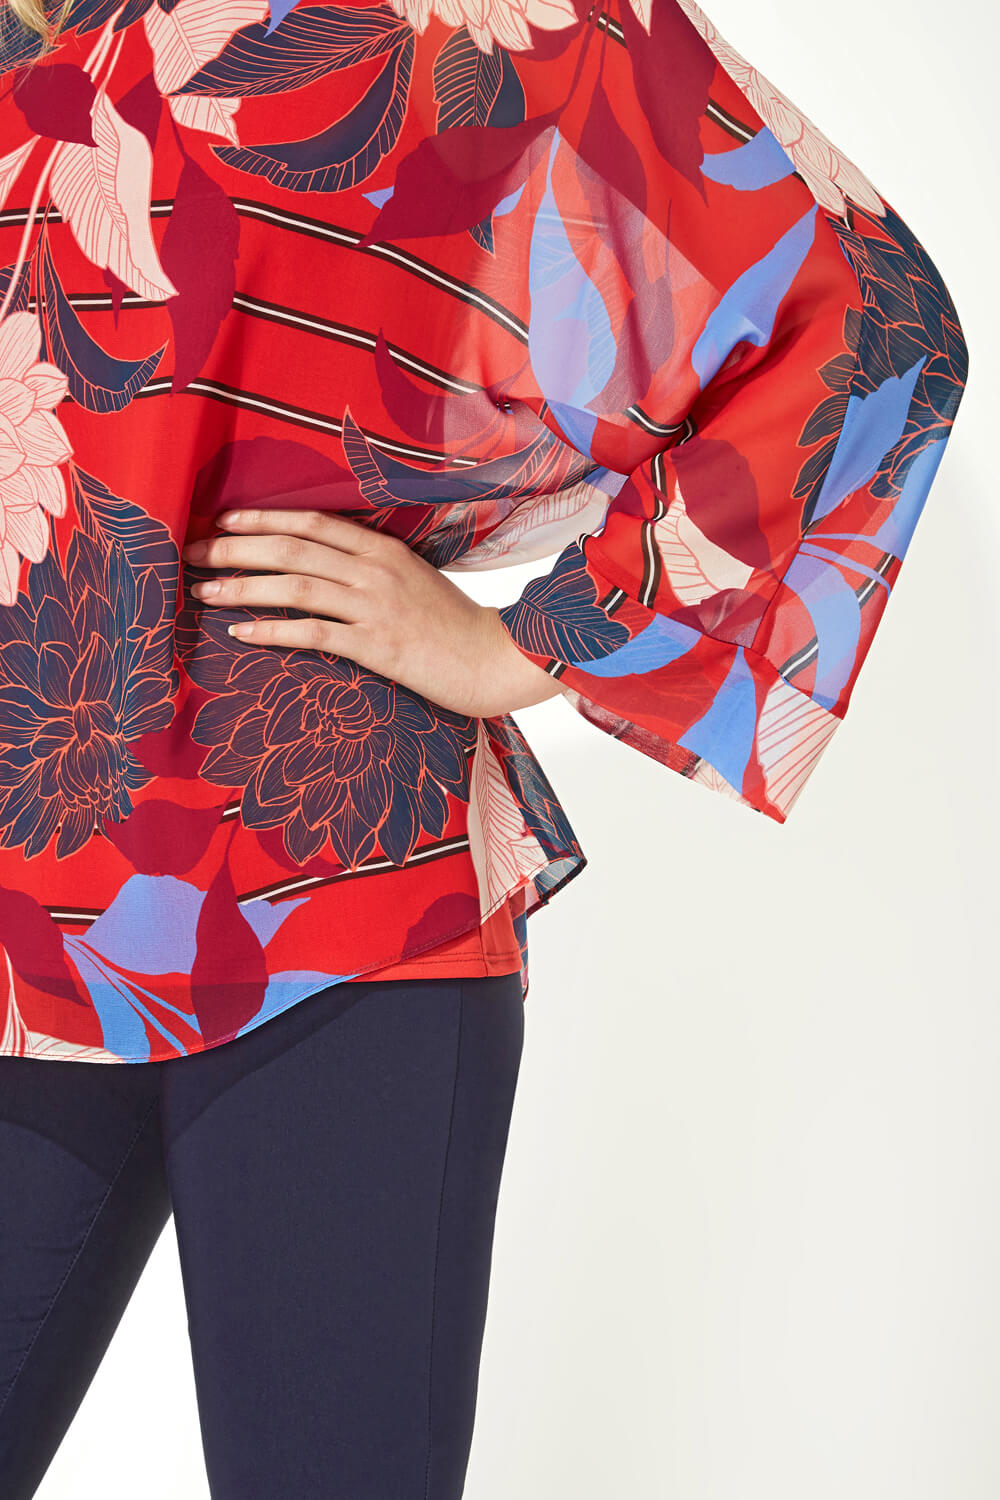 Red Floral Overlay Chiffon Top, Image 4 of 5